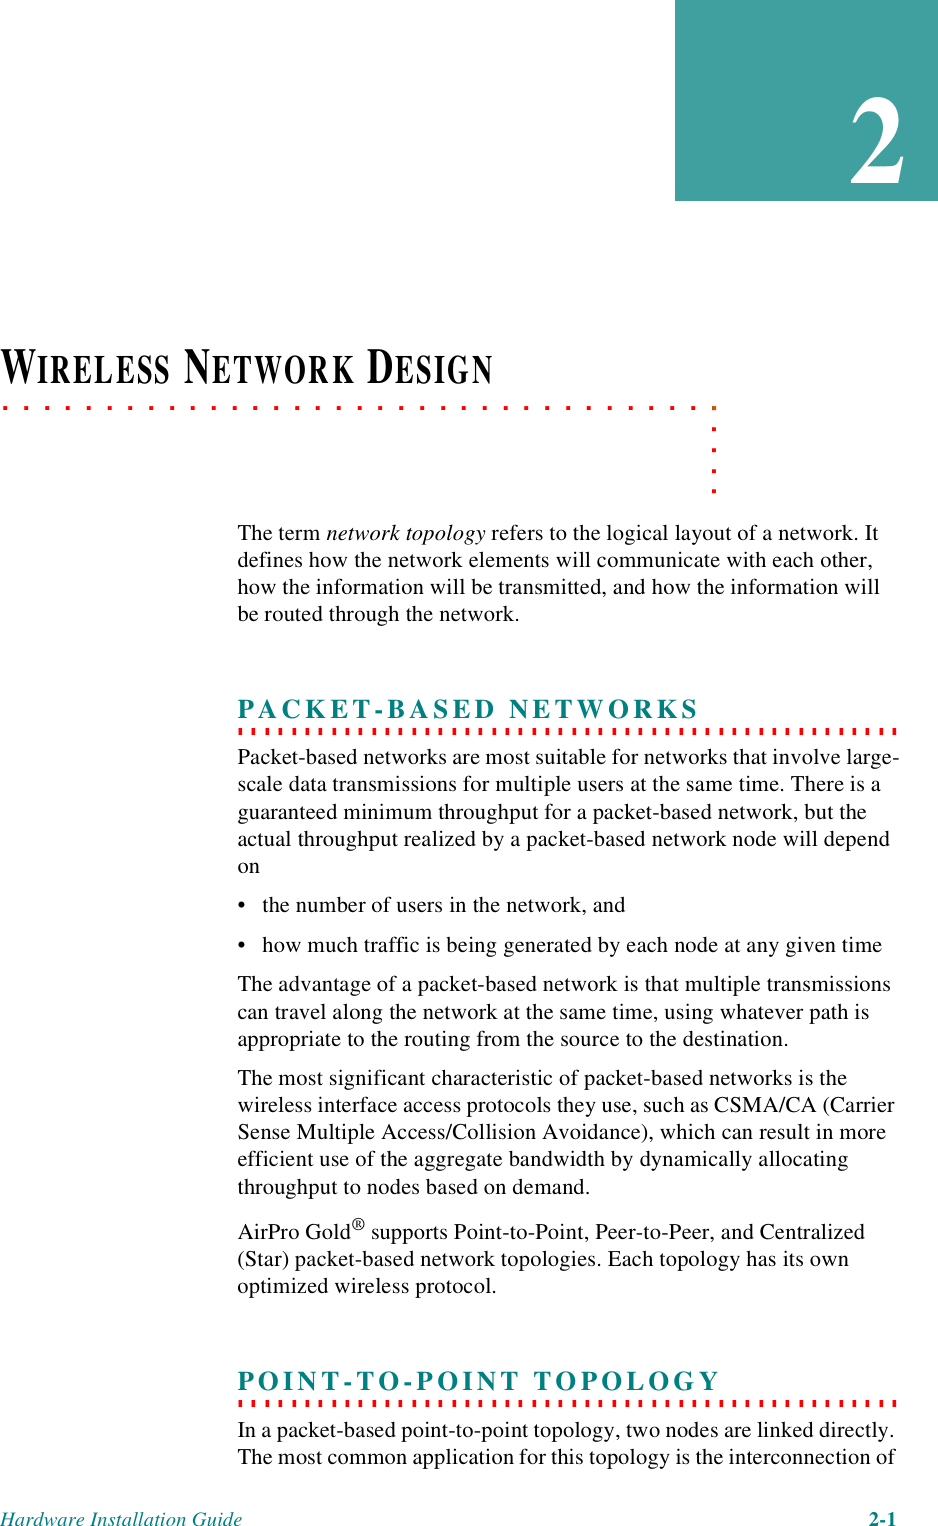 Hardware Installation Guide 2-12. . . . .. . . . . . . . . . . . . . . . . . . . . . . . . . . . . . . . . . .WIRELESS NETWORK DESIGNThe term network topology refers to the logical layout of a network. It defines how the network elements will communicate with each other, how the information will be transmitted, and how the information will be routed through the network.. . . . . . . . . . . . . . . . . . . . . . . . . . . . . . . . . . . . . . . . . . . . . . . . . . PACKET-BASED NETWORKSPacket-based networks are most suitable for networks that involve large-scale data transmissions for multiple users at the same time. There is a guaranteed minimum throughput for a packet-based network, but the actual throughput realized by a packet-based network node will depend on • the number of users in the network, and • how much traffic is being generated by each node at any given timeThe advantage of a packet-based network is that multiple transmissions can travel along the network at the same time, using whatever path is appropriate to the routing from the source to the destination. The most significant characteristic of packet-based networks is the wireless interface access protocols they use, such as CSMA/CA (Carrier Sense Multiple Access/Collision Avoidance), which can result in more efficient use of the aggregate bandwidth by dynamically allocating throughput to nodes based on demand.AirPro Gold® supports Point-to-Point, Peer-to-Peer, and Centralized (Star) packet-based network topologies. Each topology has its own optimized wireless protocol. . . . . . . . . . . . . . . . . . . . . . . . . . . . . . . . . . . . . . . . . . . . . . . . . . . POINT-TO-POINT TOPOLOGYIn a packet-based point-to-point topology, two nodes are linked directly. The most common application for this topology is the interconnection of 